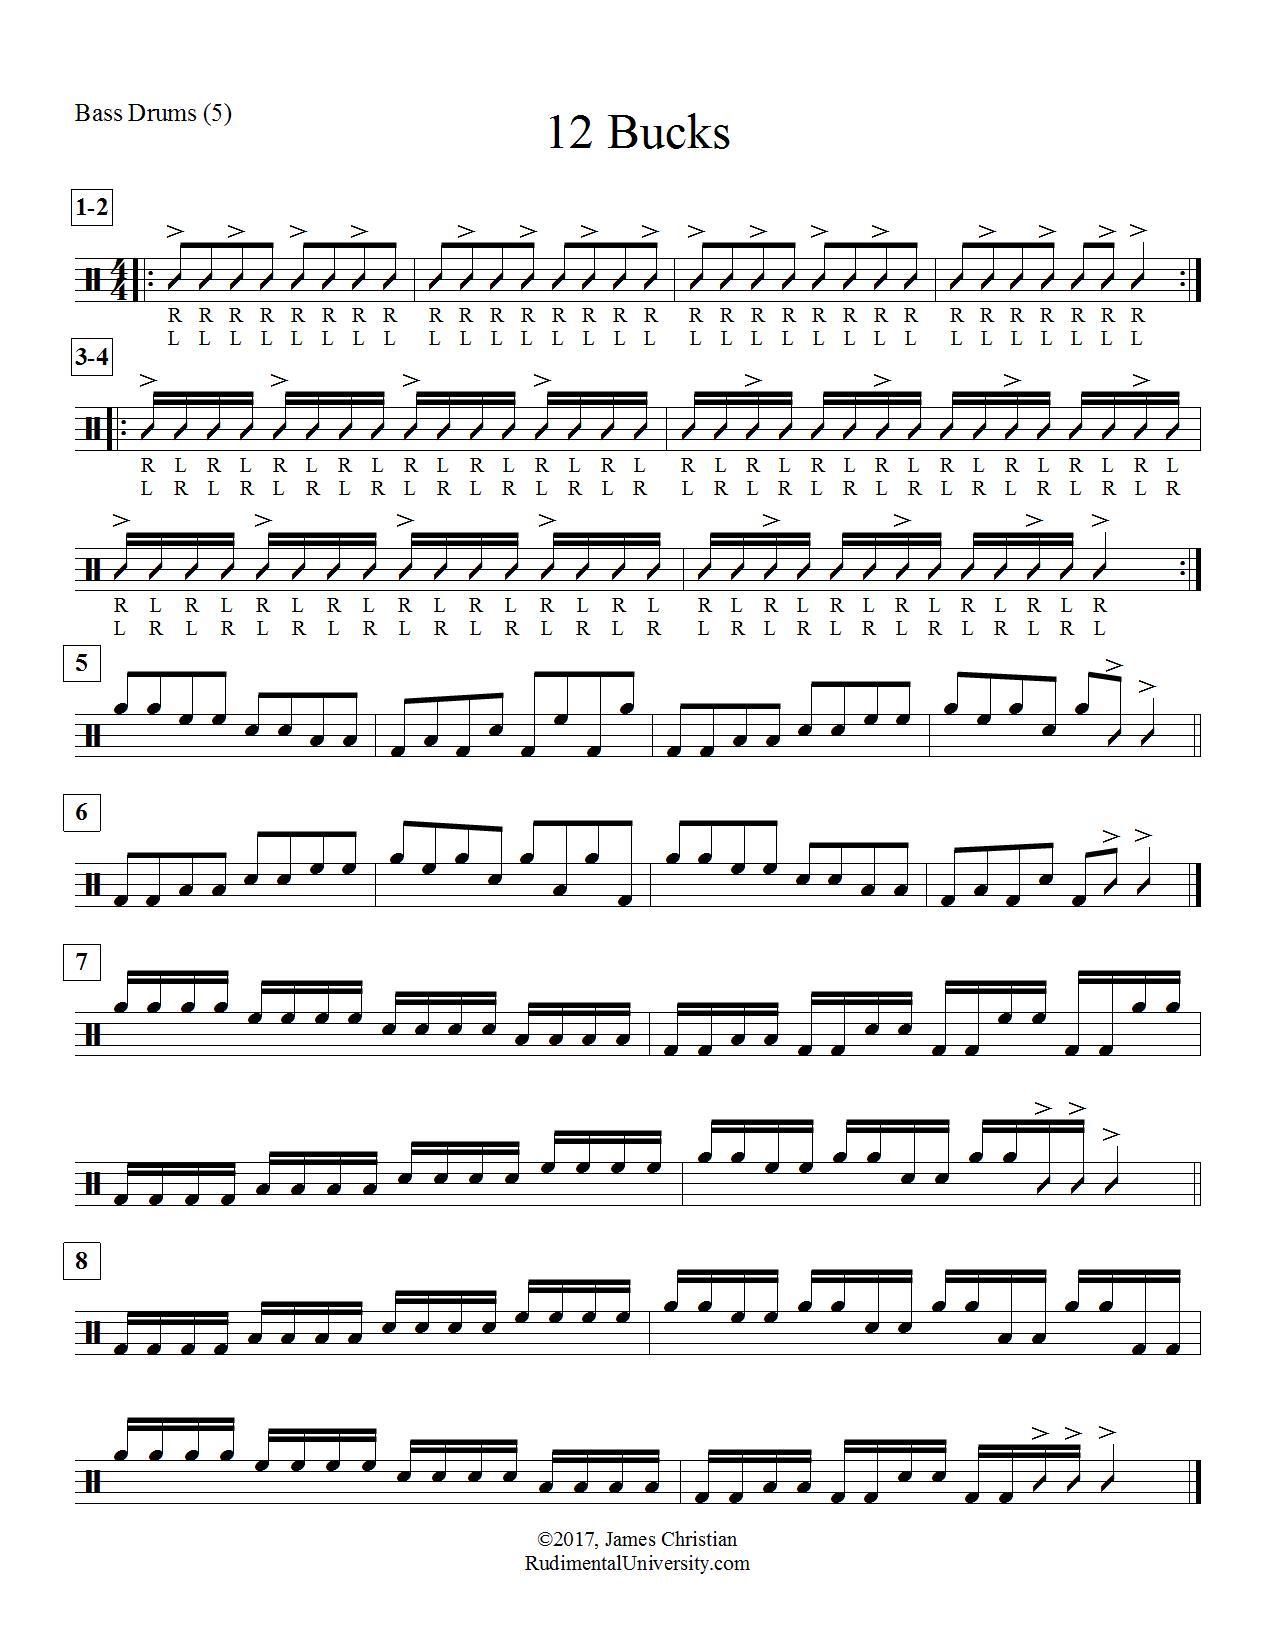 Bass Tapping Exercises